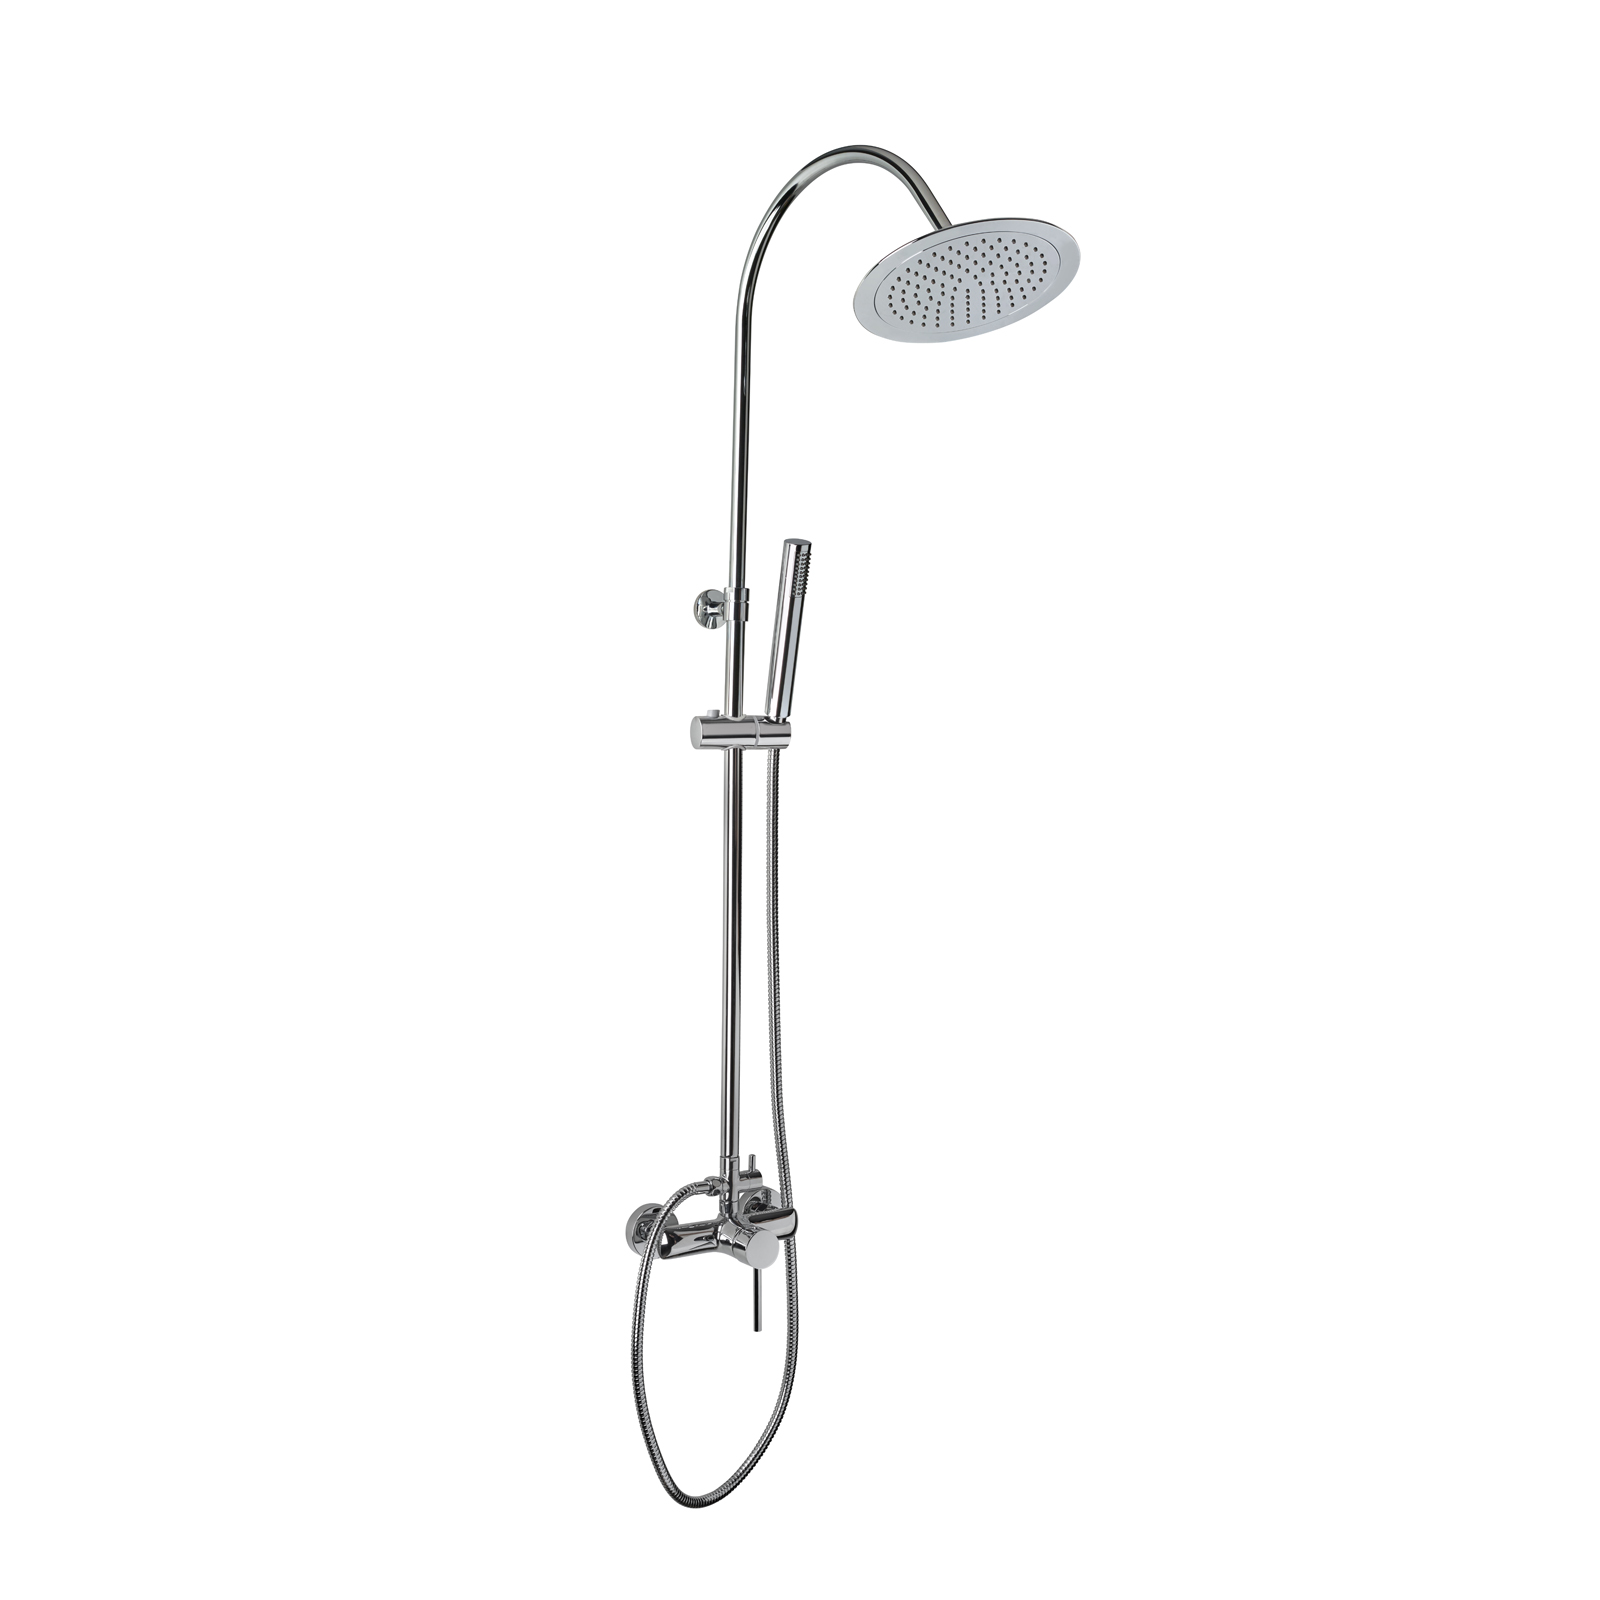 Telescopic shower column with shower mixer valve, automatic diverter, shower rose and self cleaning hand shower